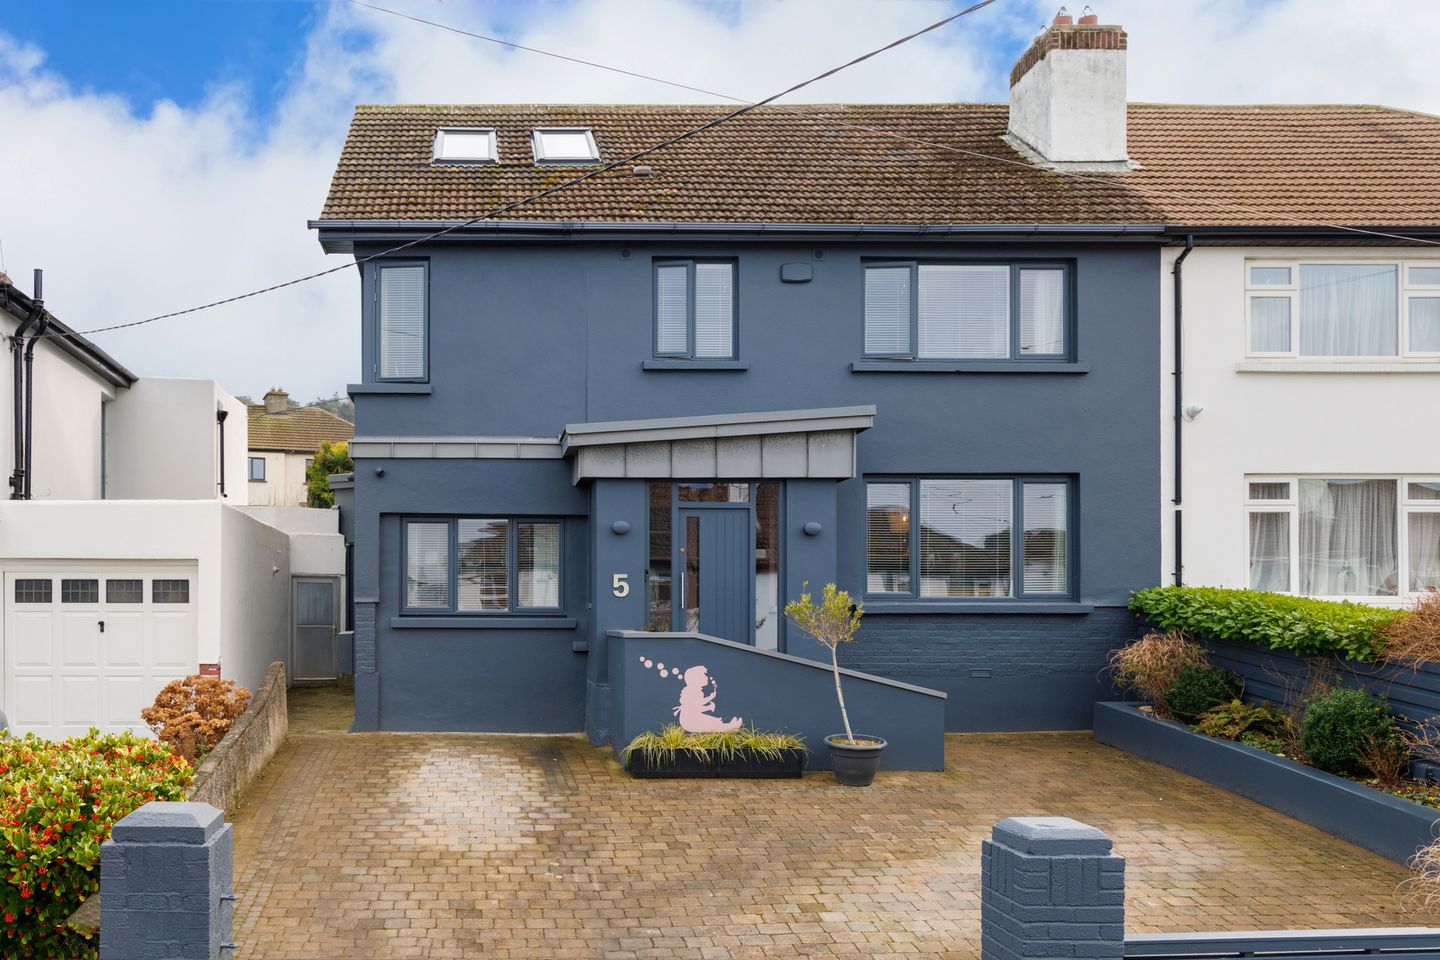 5 Camaderry Road, Bray, Co. Wicklow